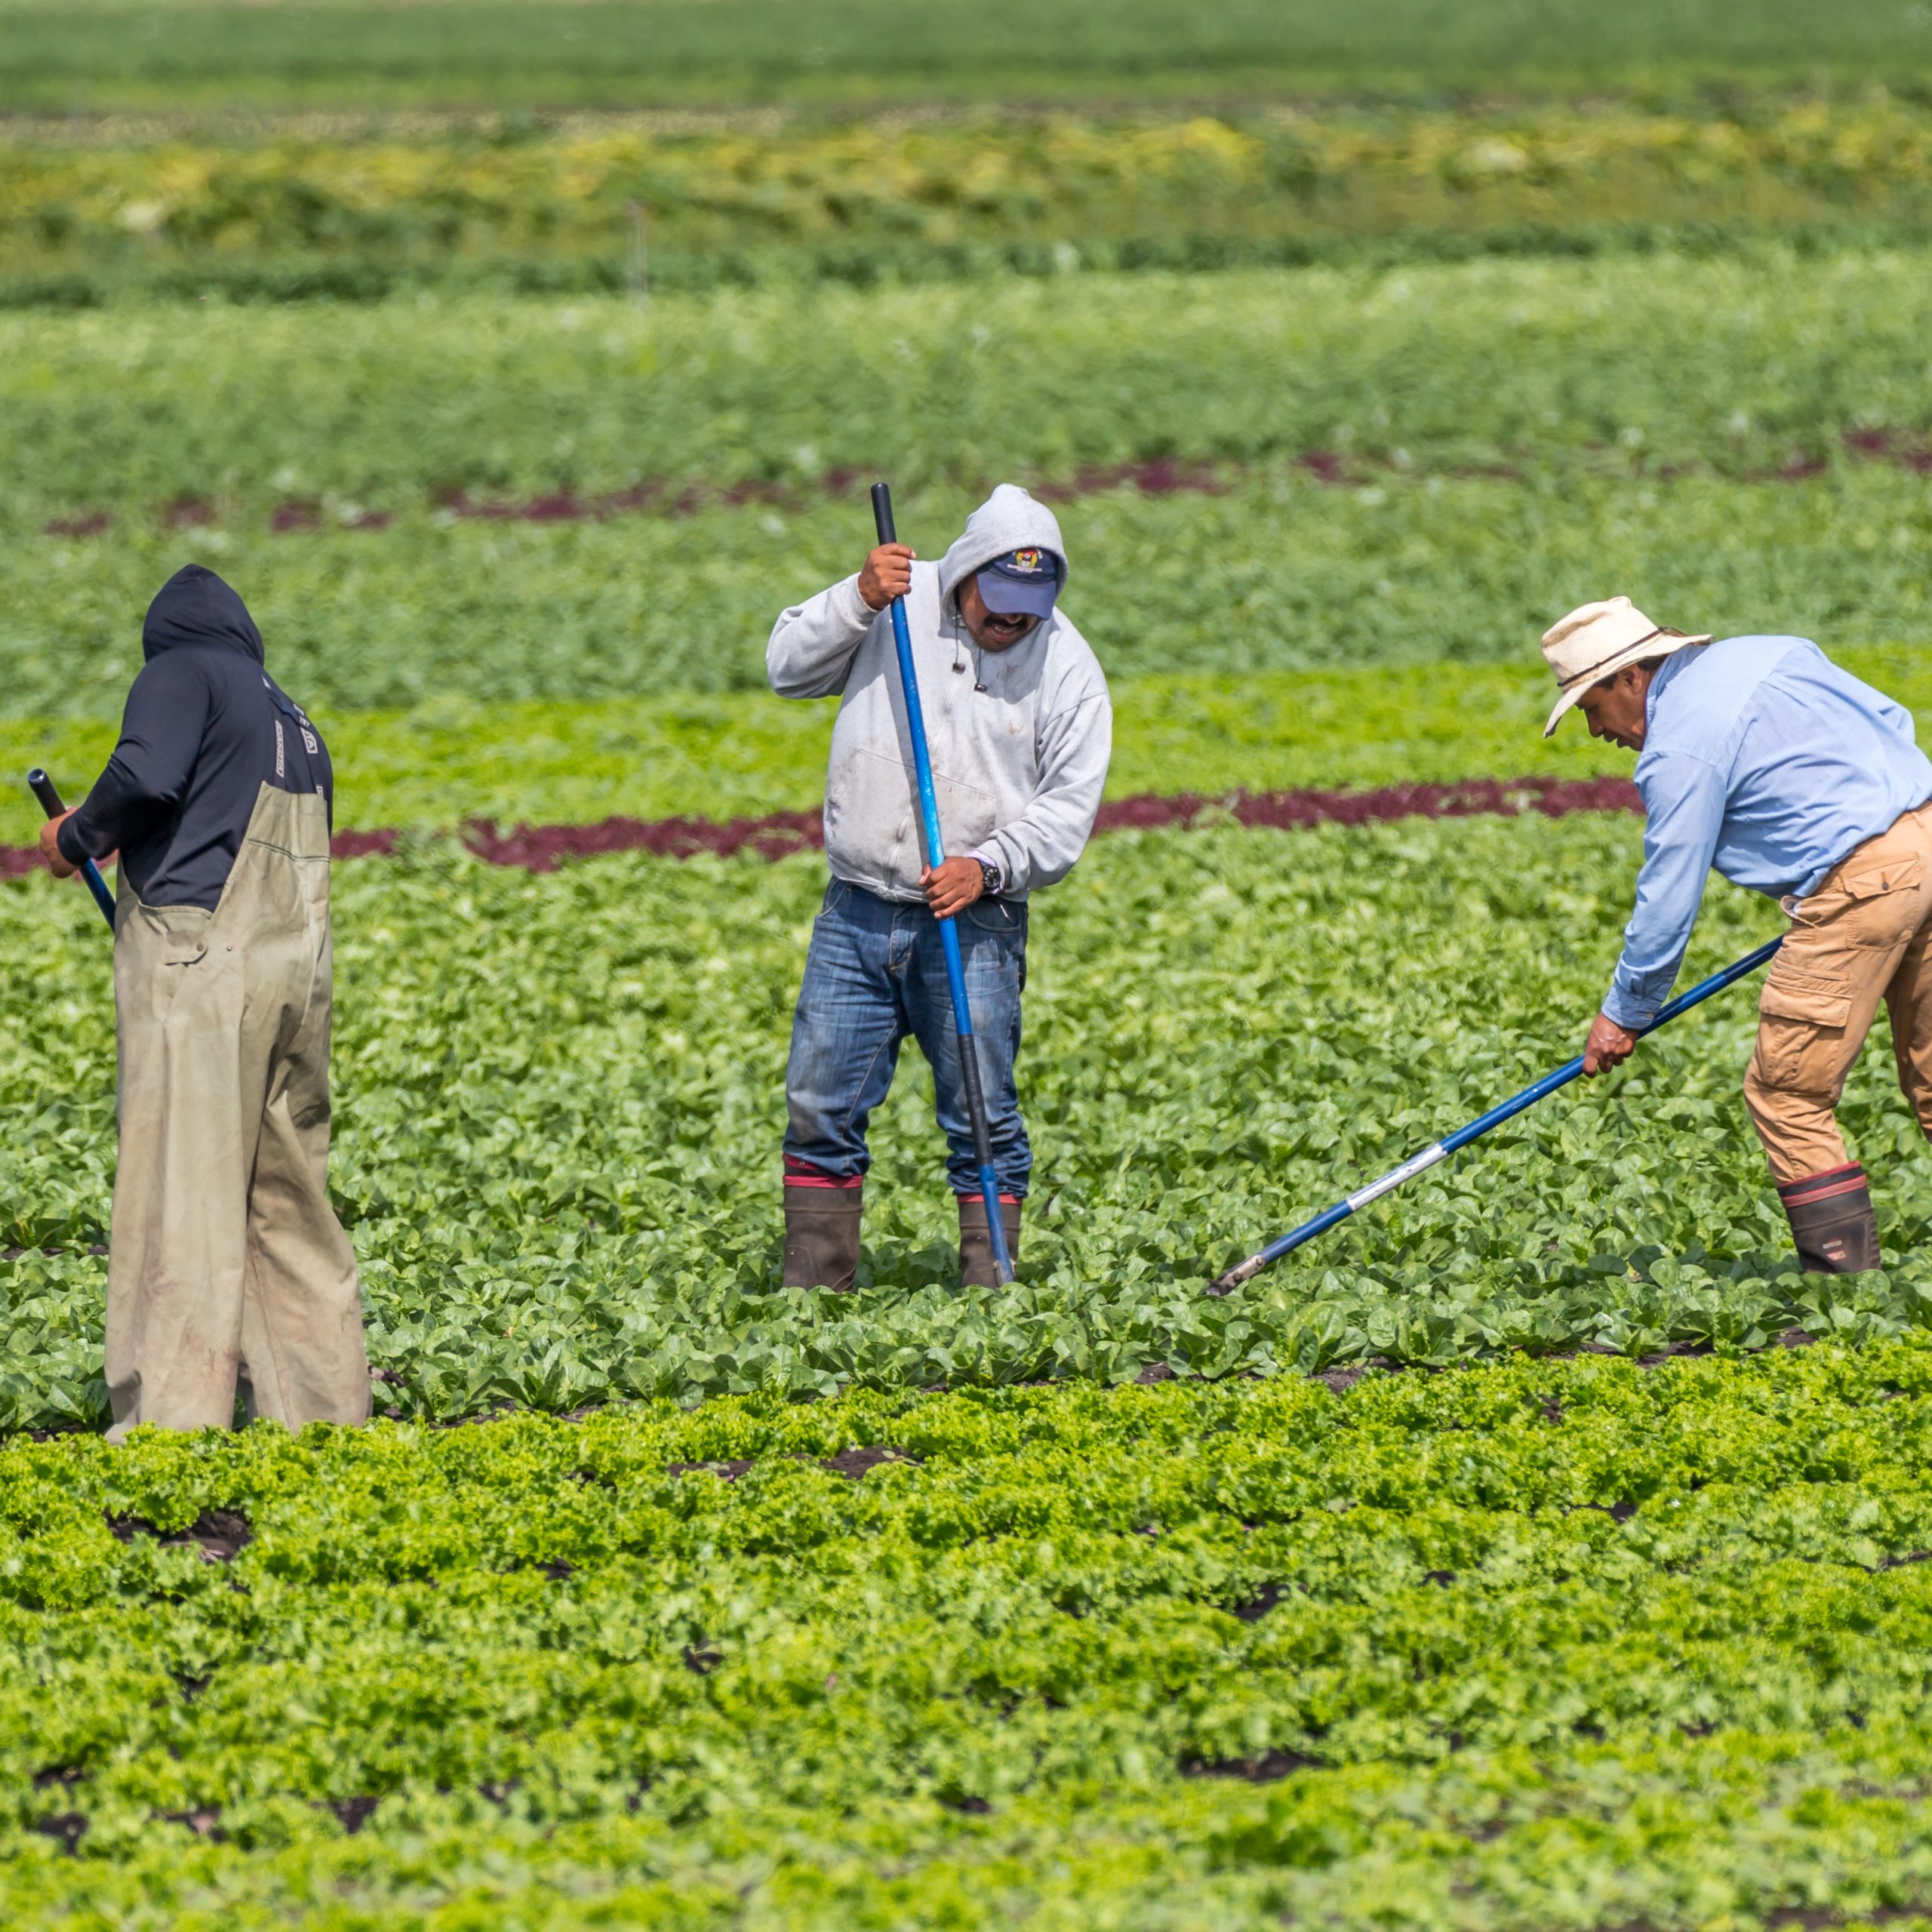 Victoria B.C. Canada-08/03/2020: Immigrant farm workers hoe weeds in a farm field of produce.